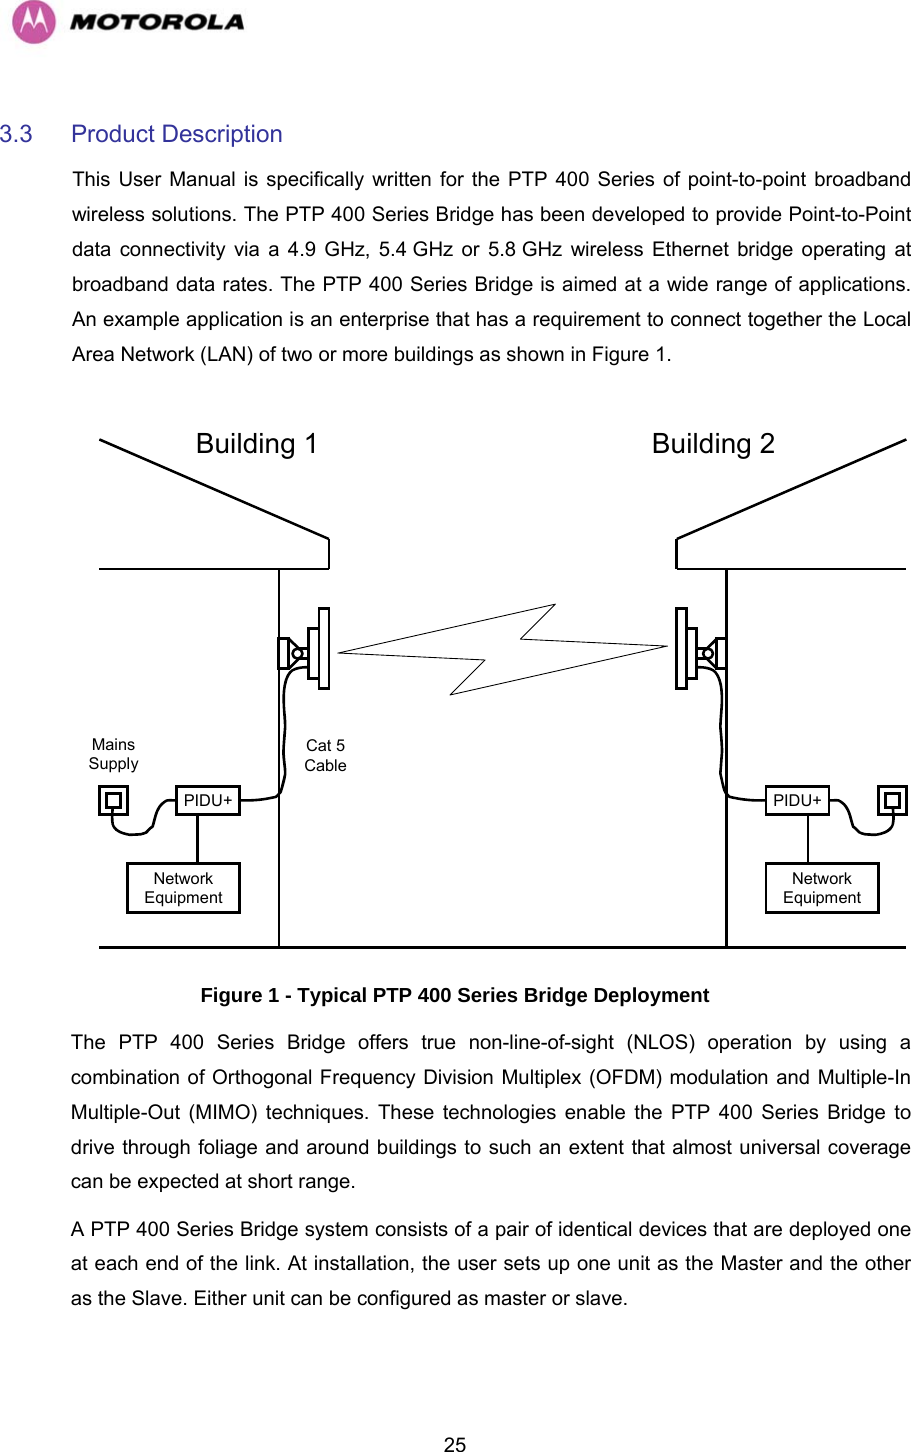   253.3 Product Description  This User Manual is specifically written for the PTP 400 Series of point-to-point broadband wireless solutions. The PTP 400 Series Bridge has been developed to provide Point-to-Point data connectivity via a 4.9 GHz, 5.4 GHz or 5.8 GHz wireless Ethernet bridge operating at broadband data rates. The PTP 400 Series Bridge is aimed at a wide range of applications. An example application is an enterprise that has a requirement to connect together the Local Area Network (LAN) of two or more buildings as shown in Figure 1.   PIDU+NetworkEquipmentPIDU+NetworkEquipmentMainsSupplyCat 5CableBuilding 1 Building 2 Figure 1 - Typical PTP 400 Series Bridge Deployment The PTP 400 Series Bridge offers true non-line-of-sight (NLOS) operation by using a combination of Orthogonal Frequency Division Multiplex (OFDM) modulation and Multiple-In Multiple-Out (MIMO) techniques. These technologies enable the PTP 400 Series Bridge to drive through foliage and around buildings to such an extent that almost universal coverage can be expected at short range.  A PTP 400 Series Bridge system consists of a pair of identical devices that are deployed one at each end of the link. At installation, the user sets up one unit as the Master and the other as the Slave. Either unit can be configured as master or slave.  